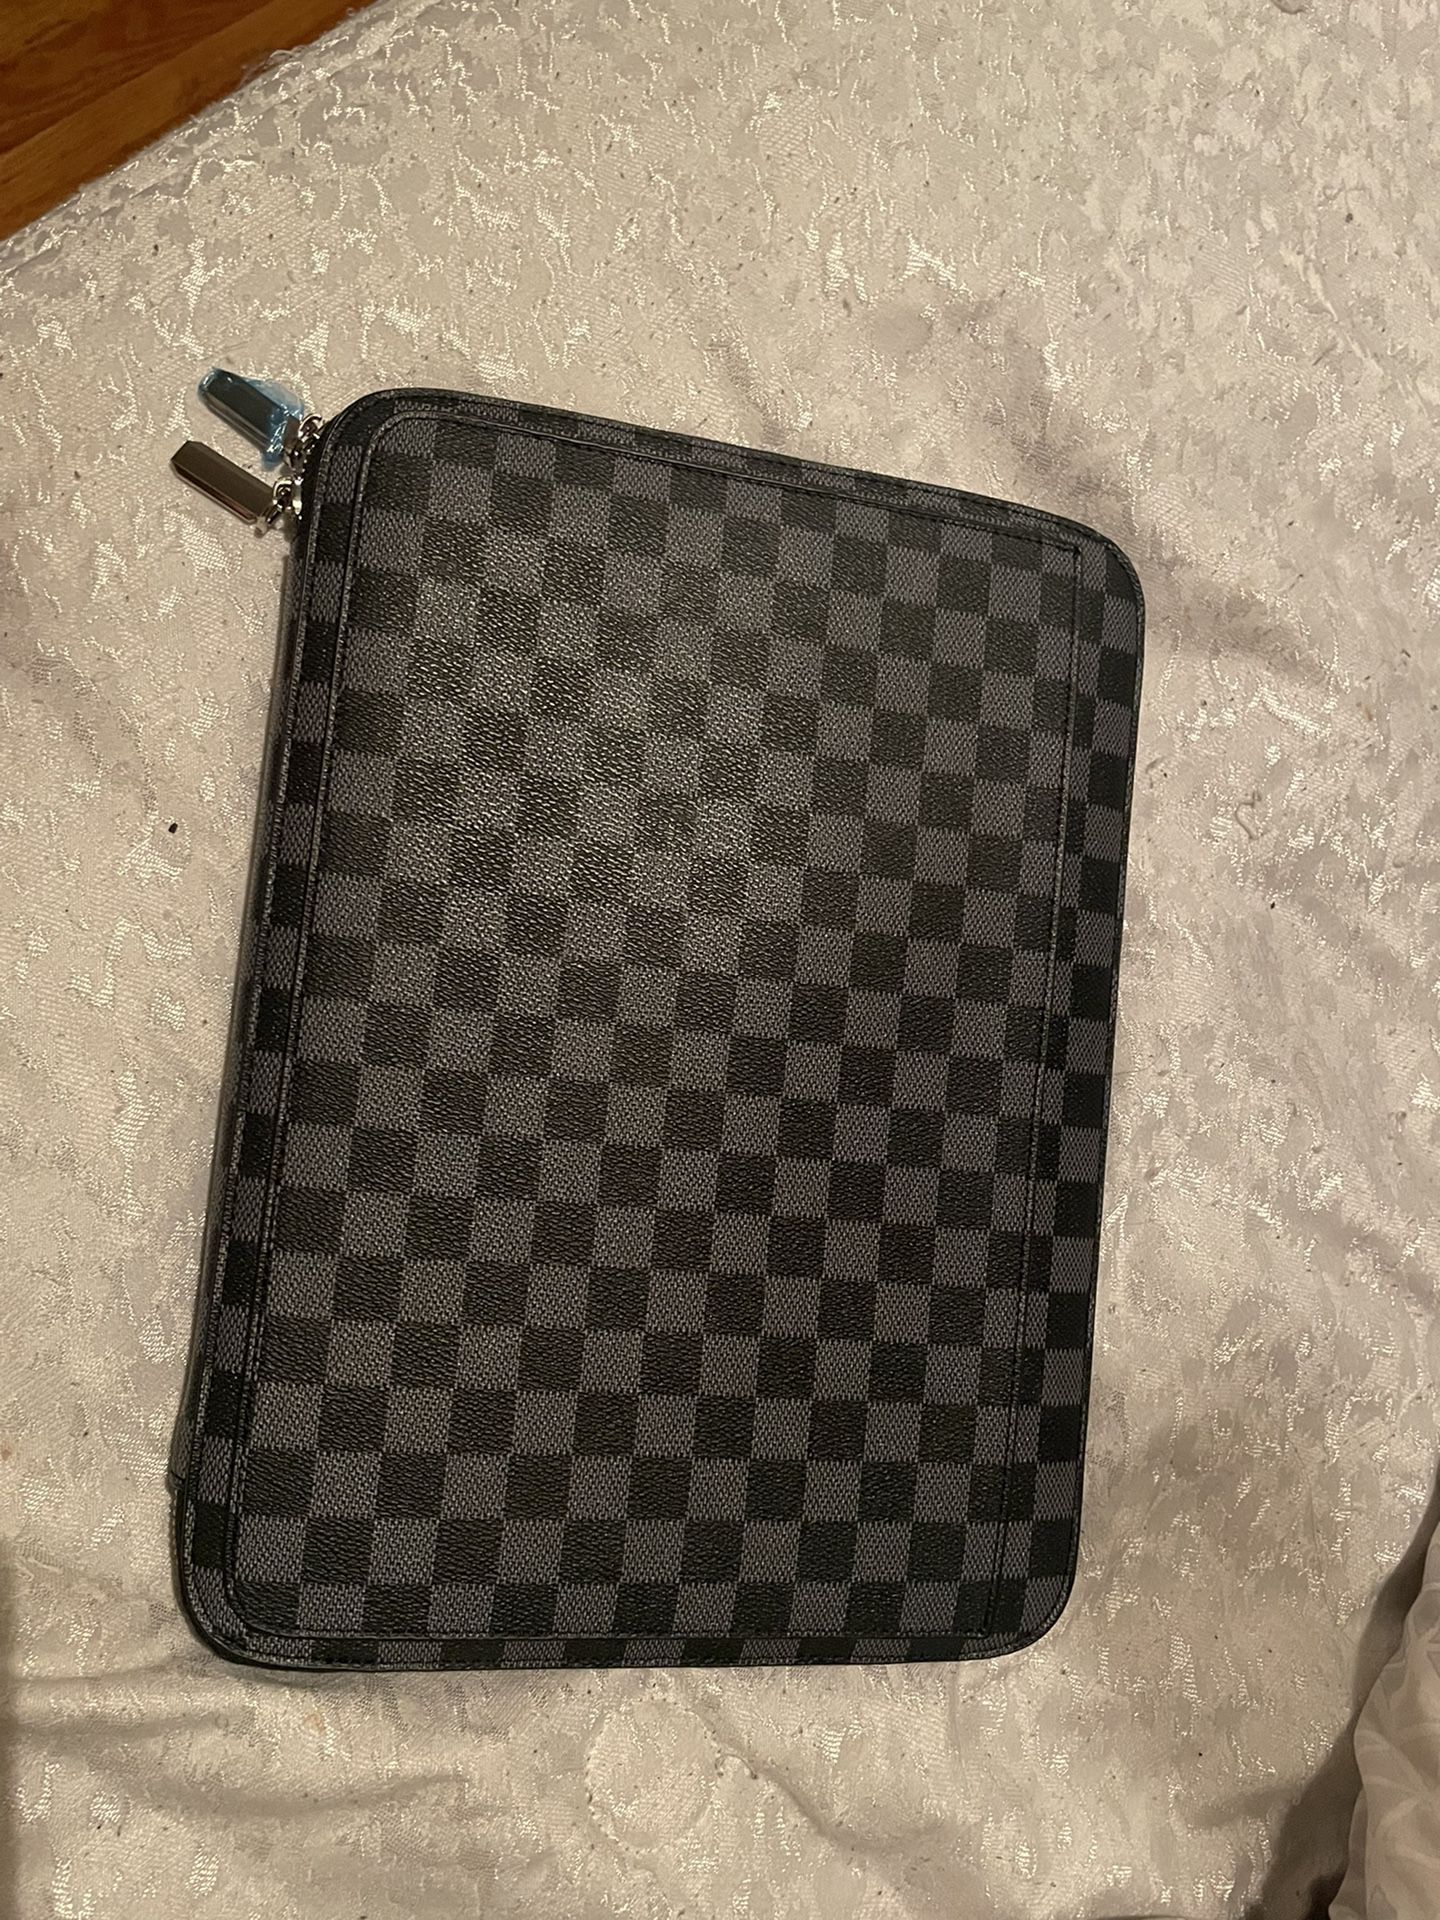  Checkered labtop Case For 13-in Labtops